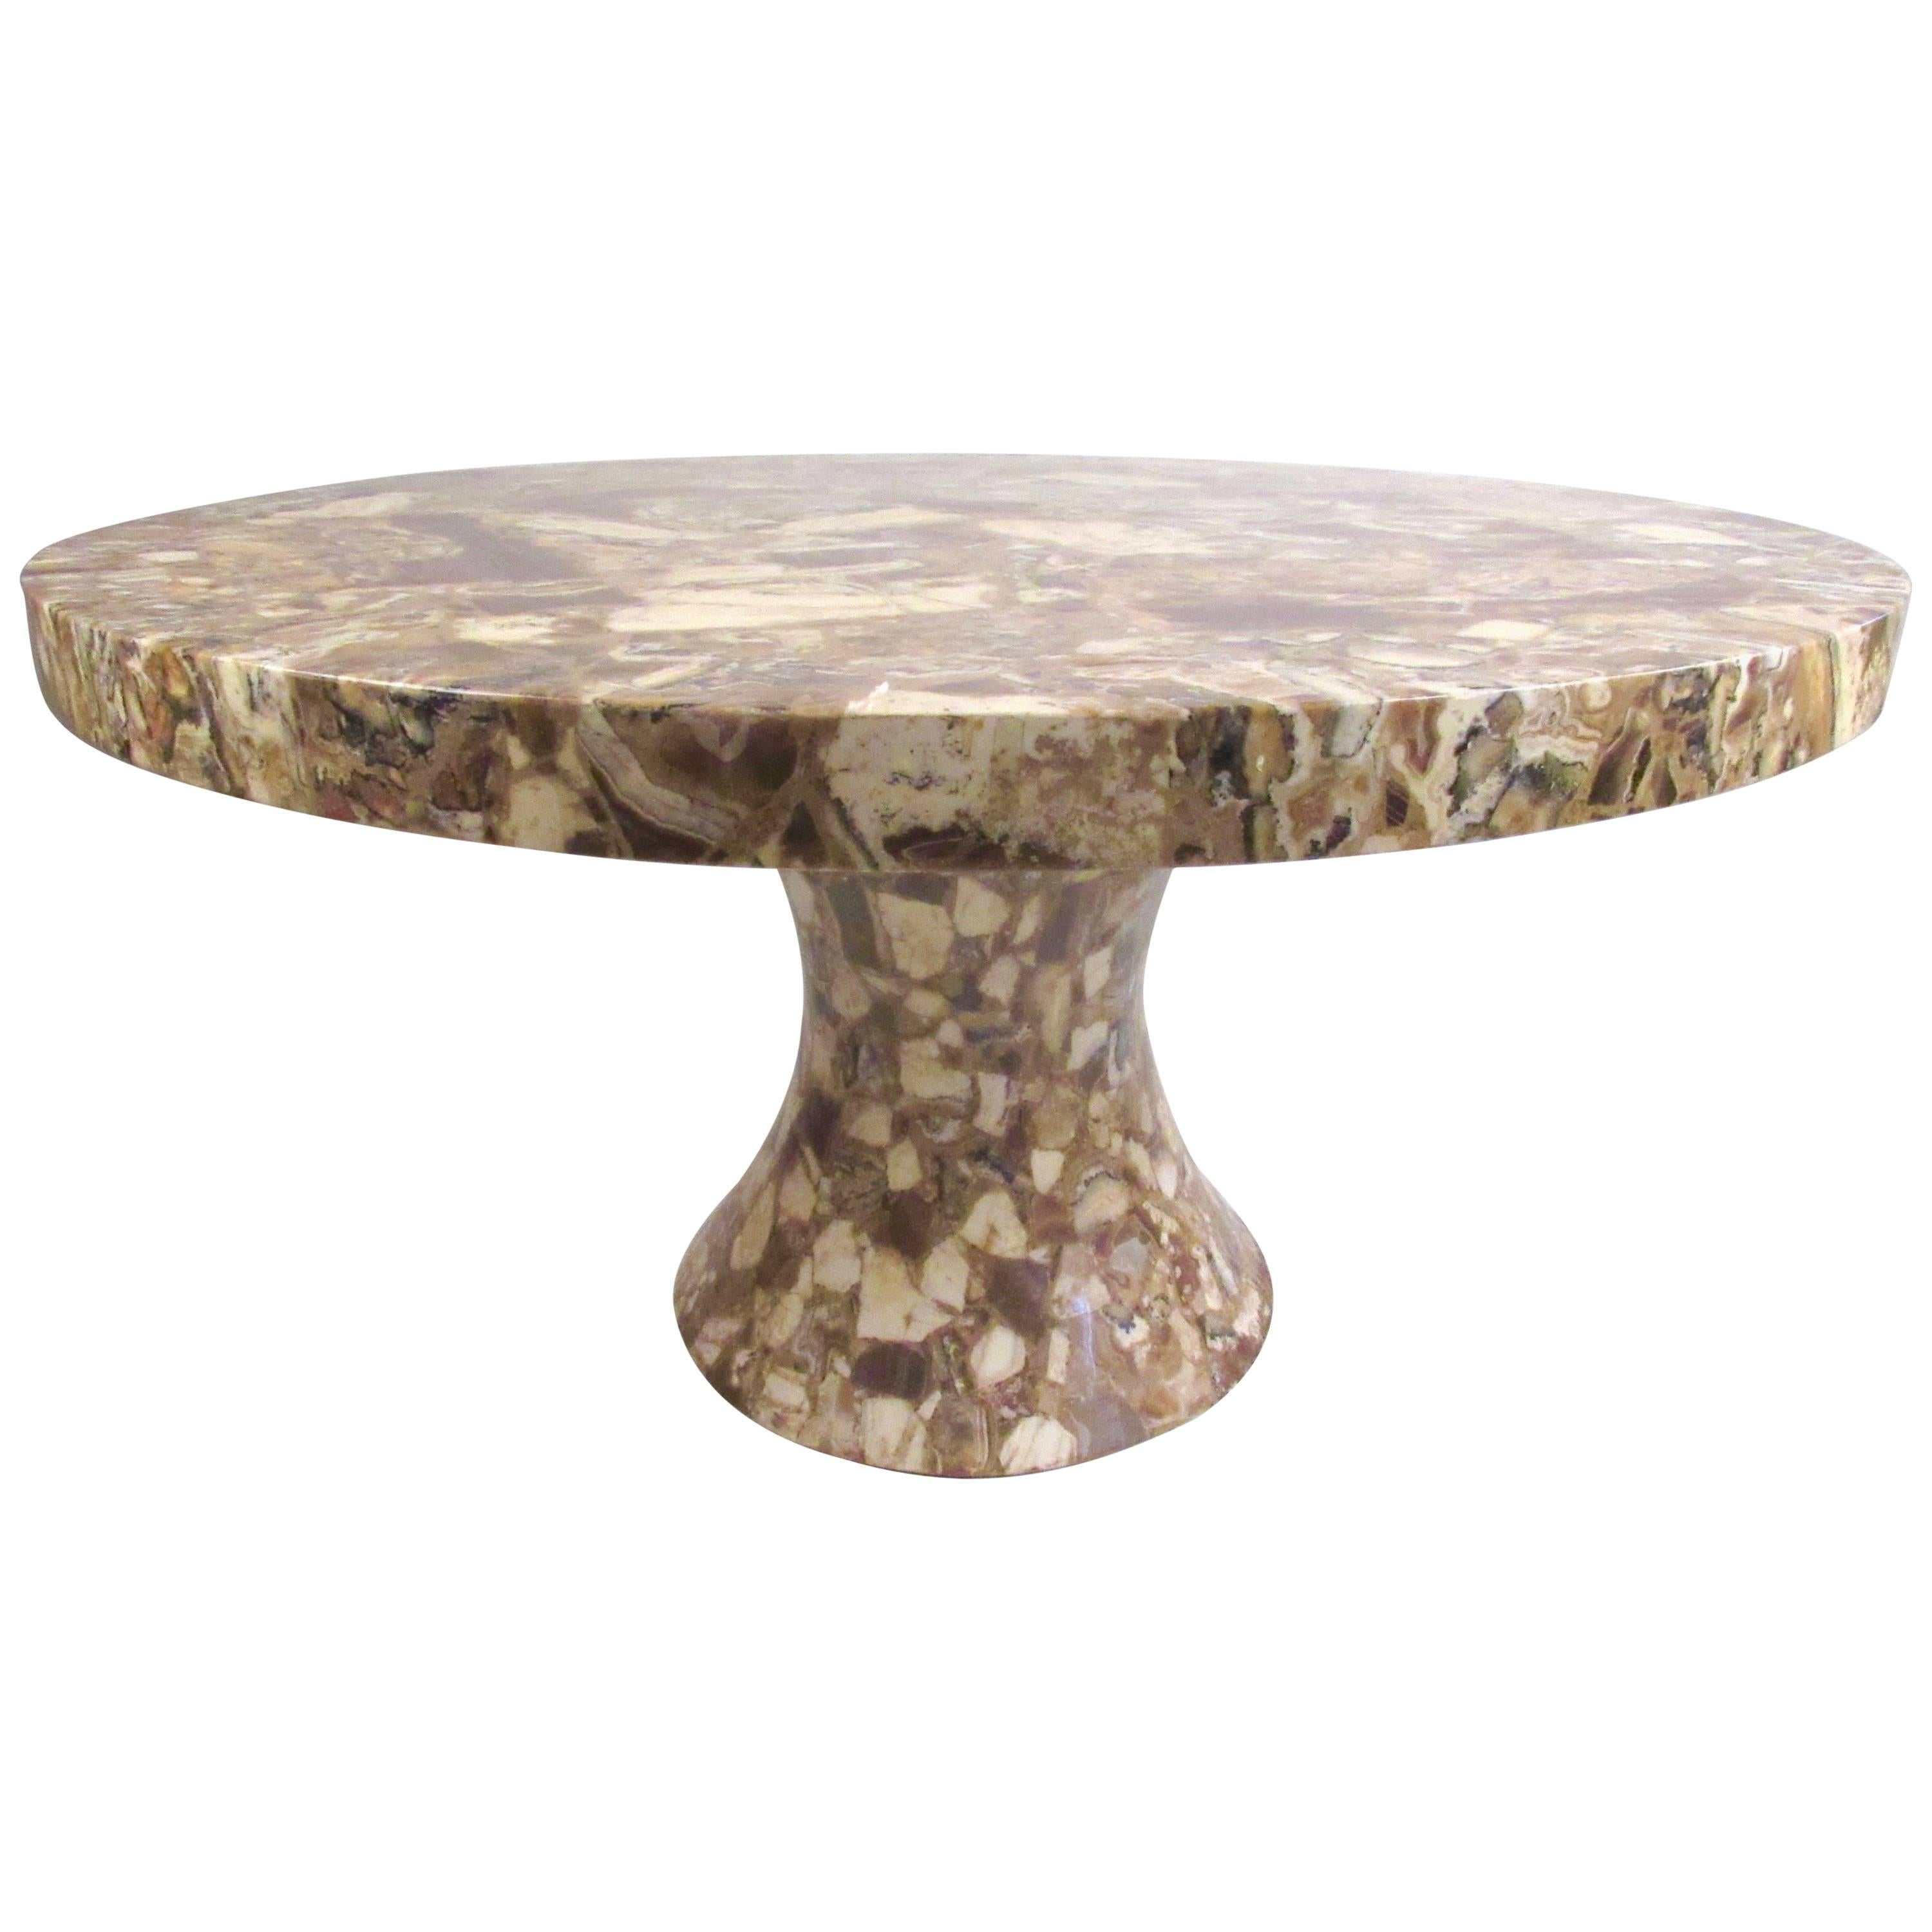 Vintage Pedestal Dining Table by Muller's Onyx